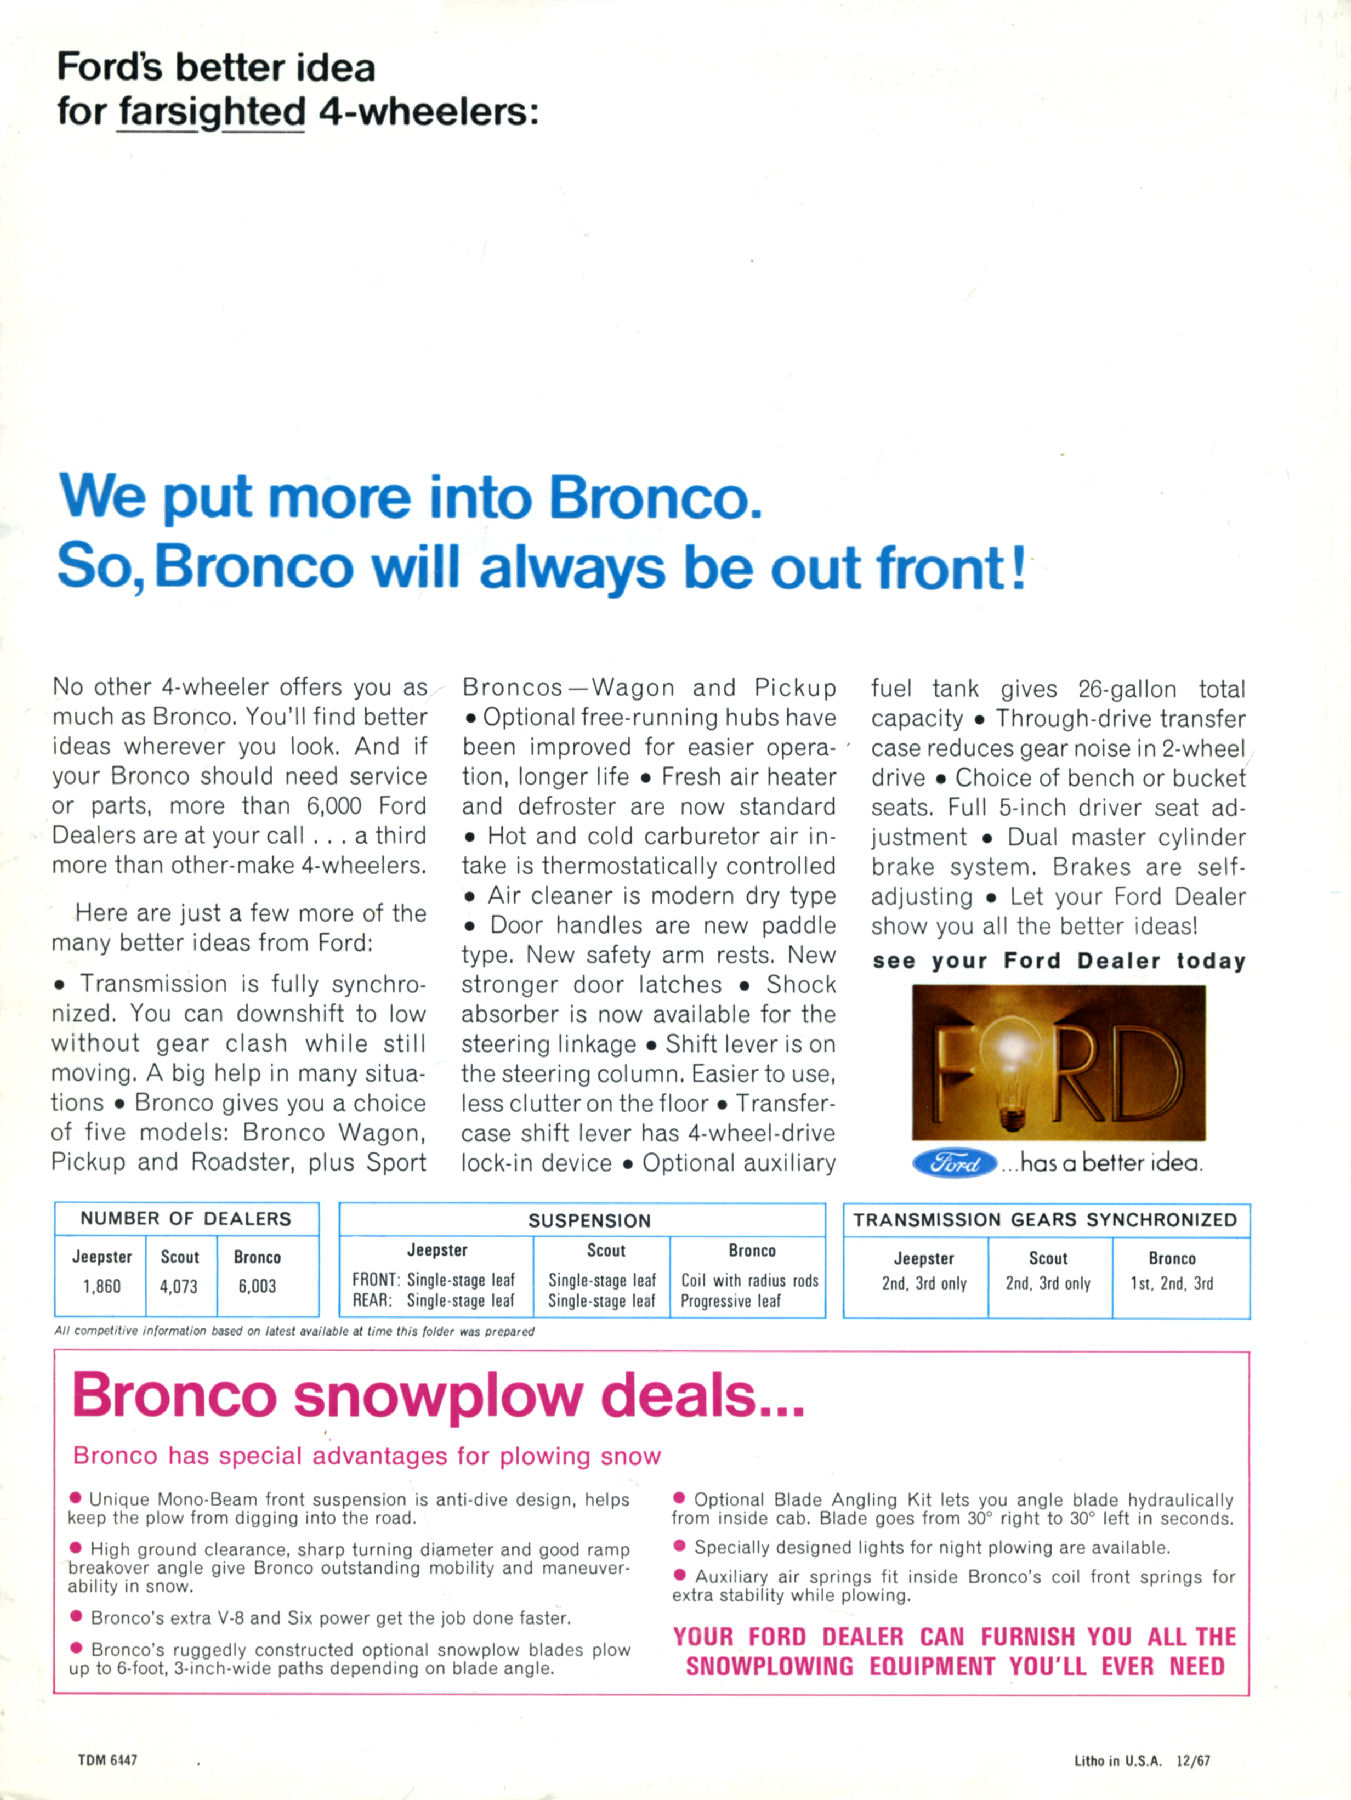 1968 Ford Bronco Mailer-04